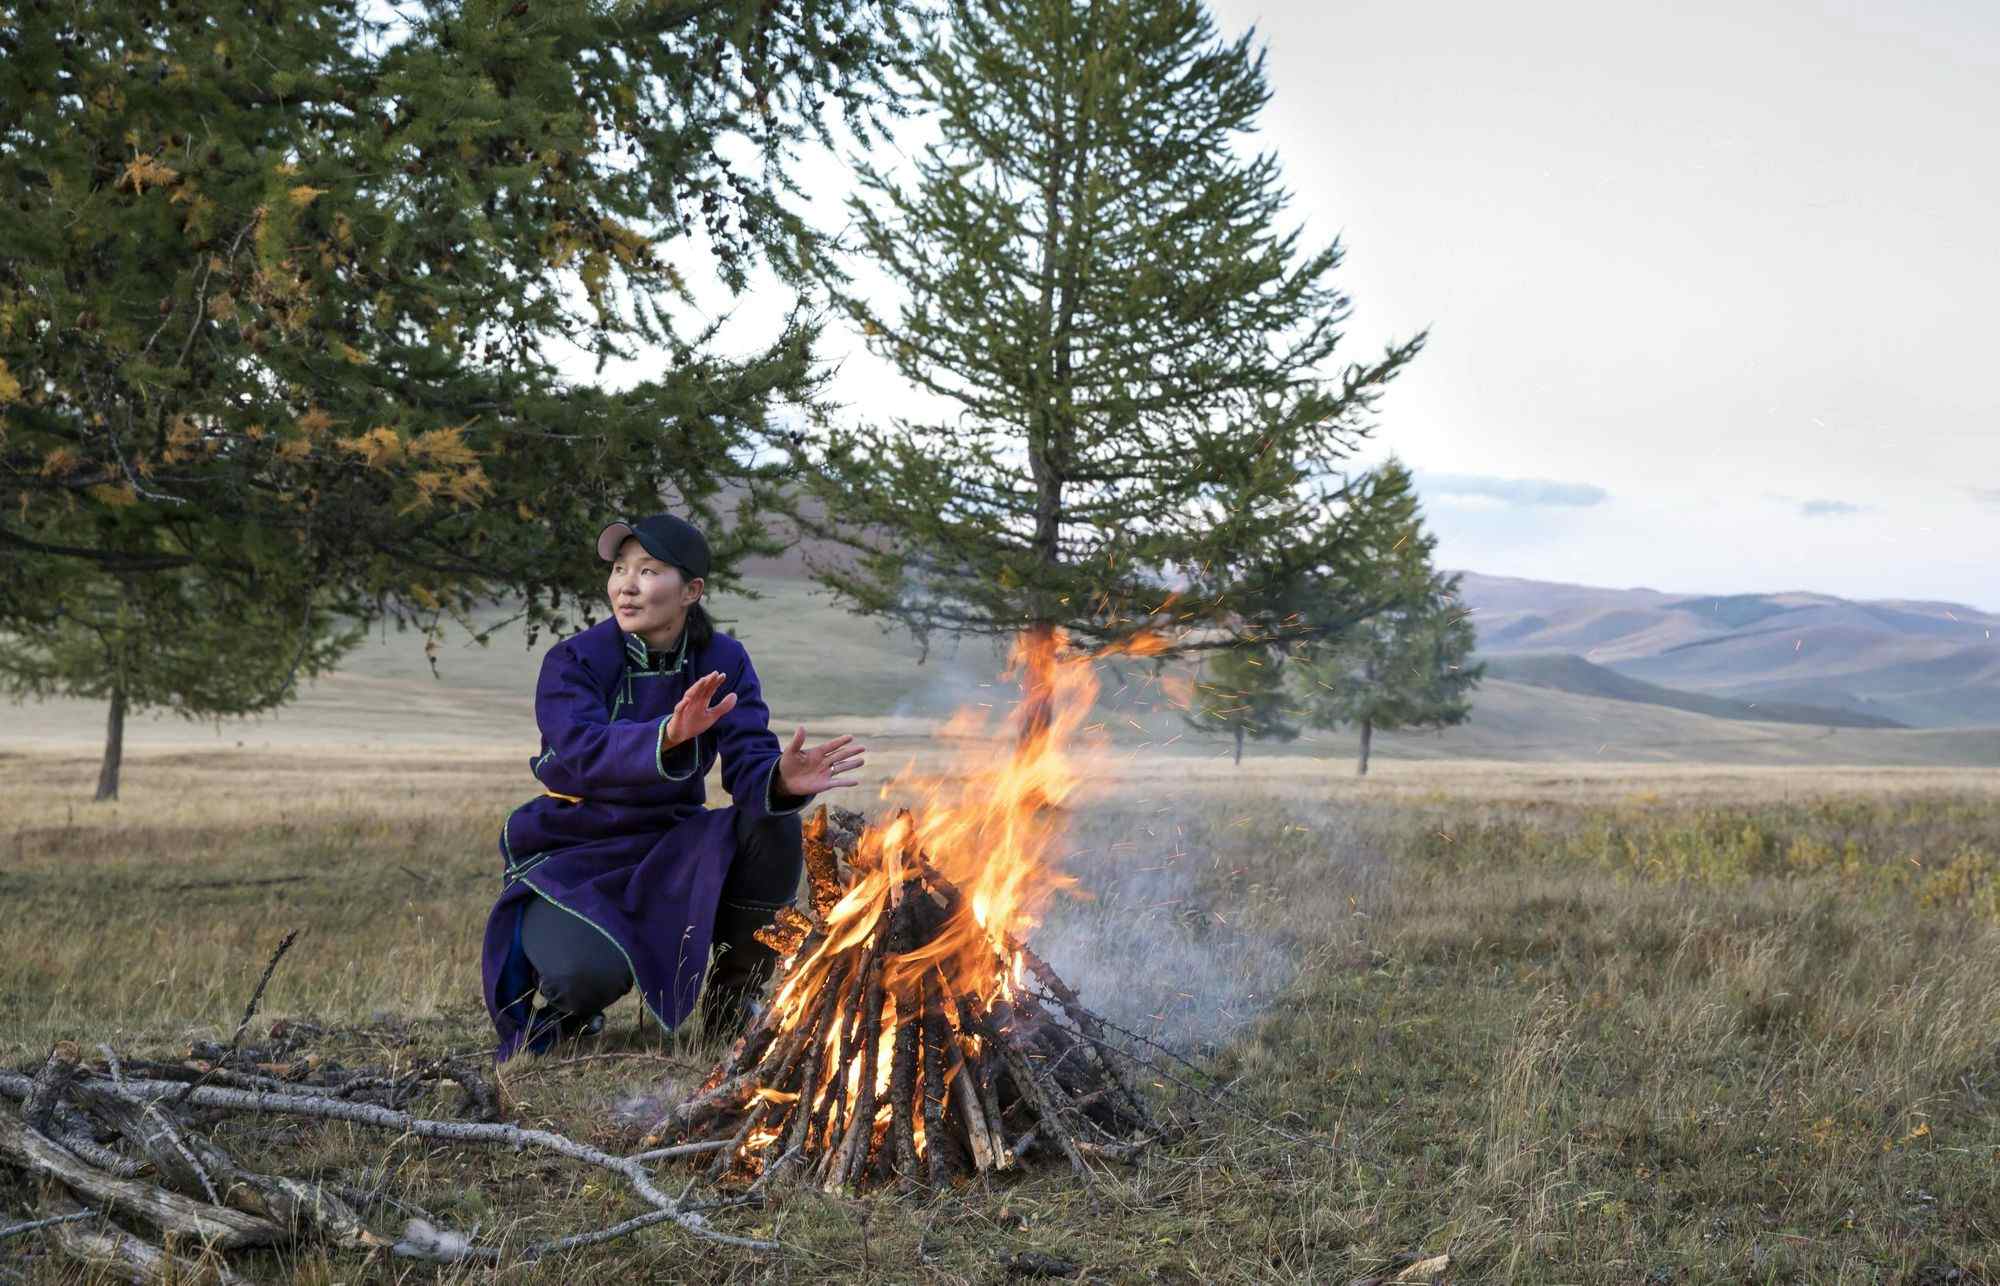 How Tourism is Empowering Local Women in Mongolia